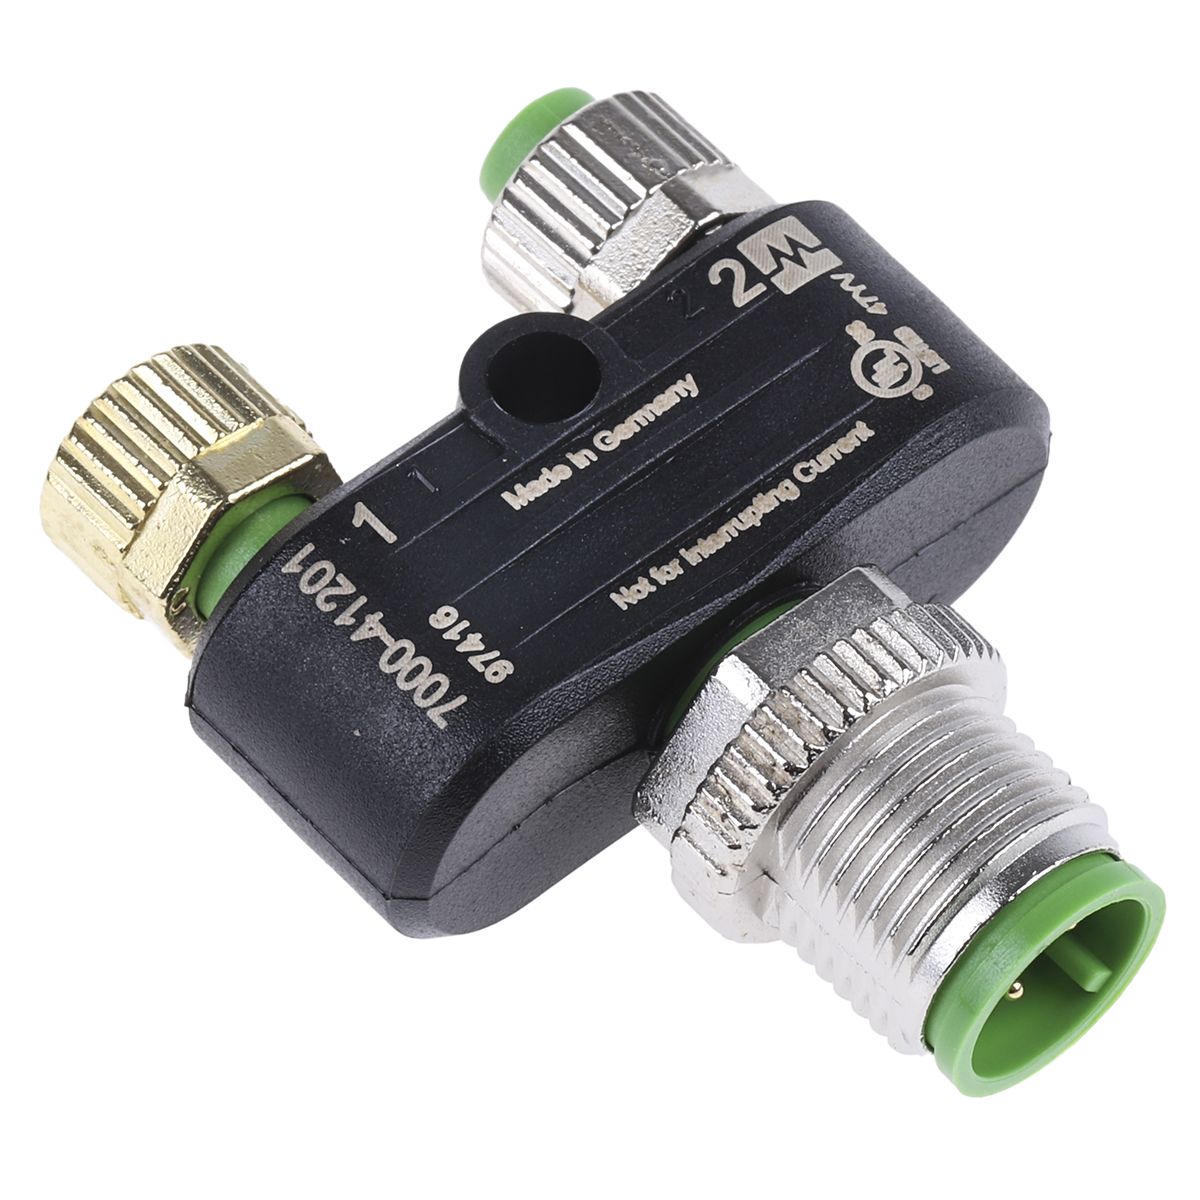 Murrelektronik 7000 Cable Mount Connector, 4 Contacts, M12 Connector, Plug and Socket